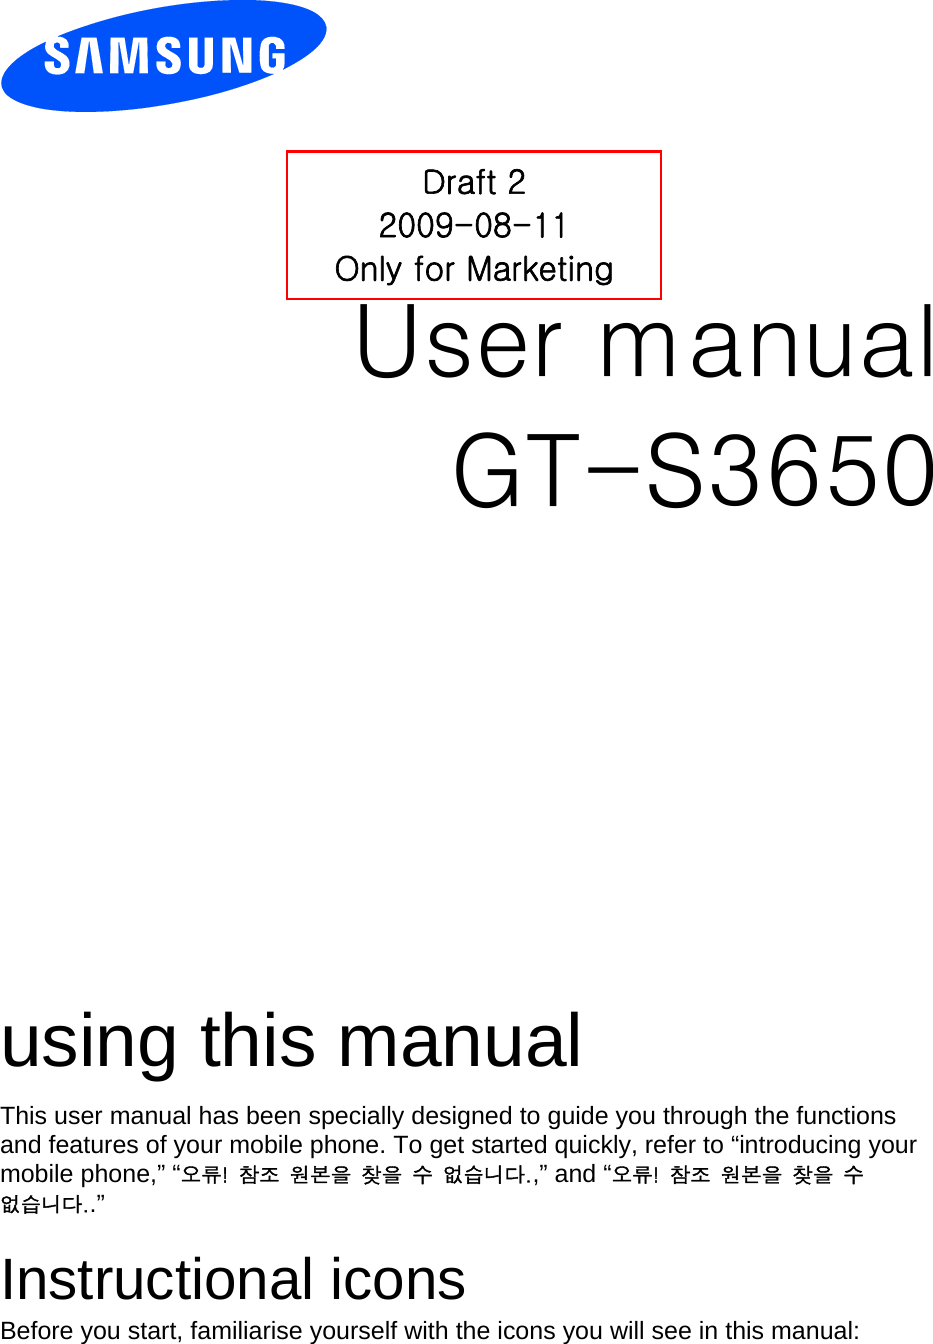          User manual GT-S3650                  using this manual This user manual has been specially designed to guide you through the functions and features of your mobile phone. To get started quickly, refer to “introducing your mobile phone,” “오류!  참조  원본을  찾을  수  없습니다.,” and “오류!  참조  원본을  찾을  수 없습니다..”  Instructional icons Before you start, familiarise yourself with the icons you will see in this manual:   Draft 2 2009-08-11 Only for Marketing 